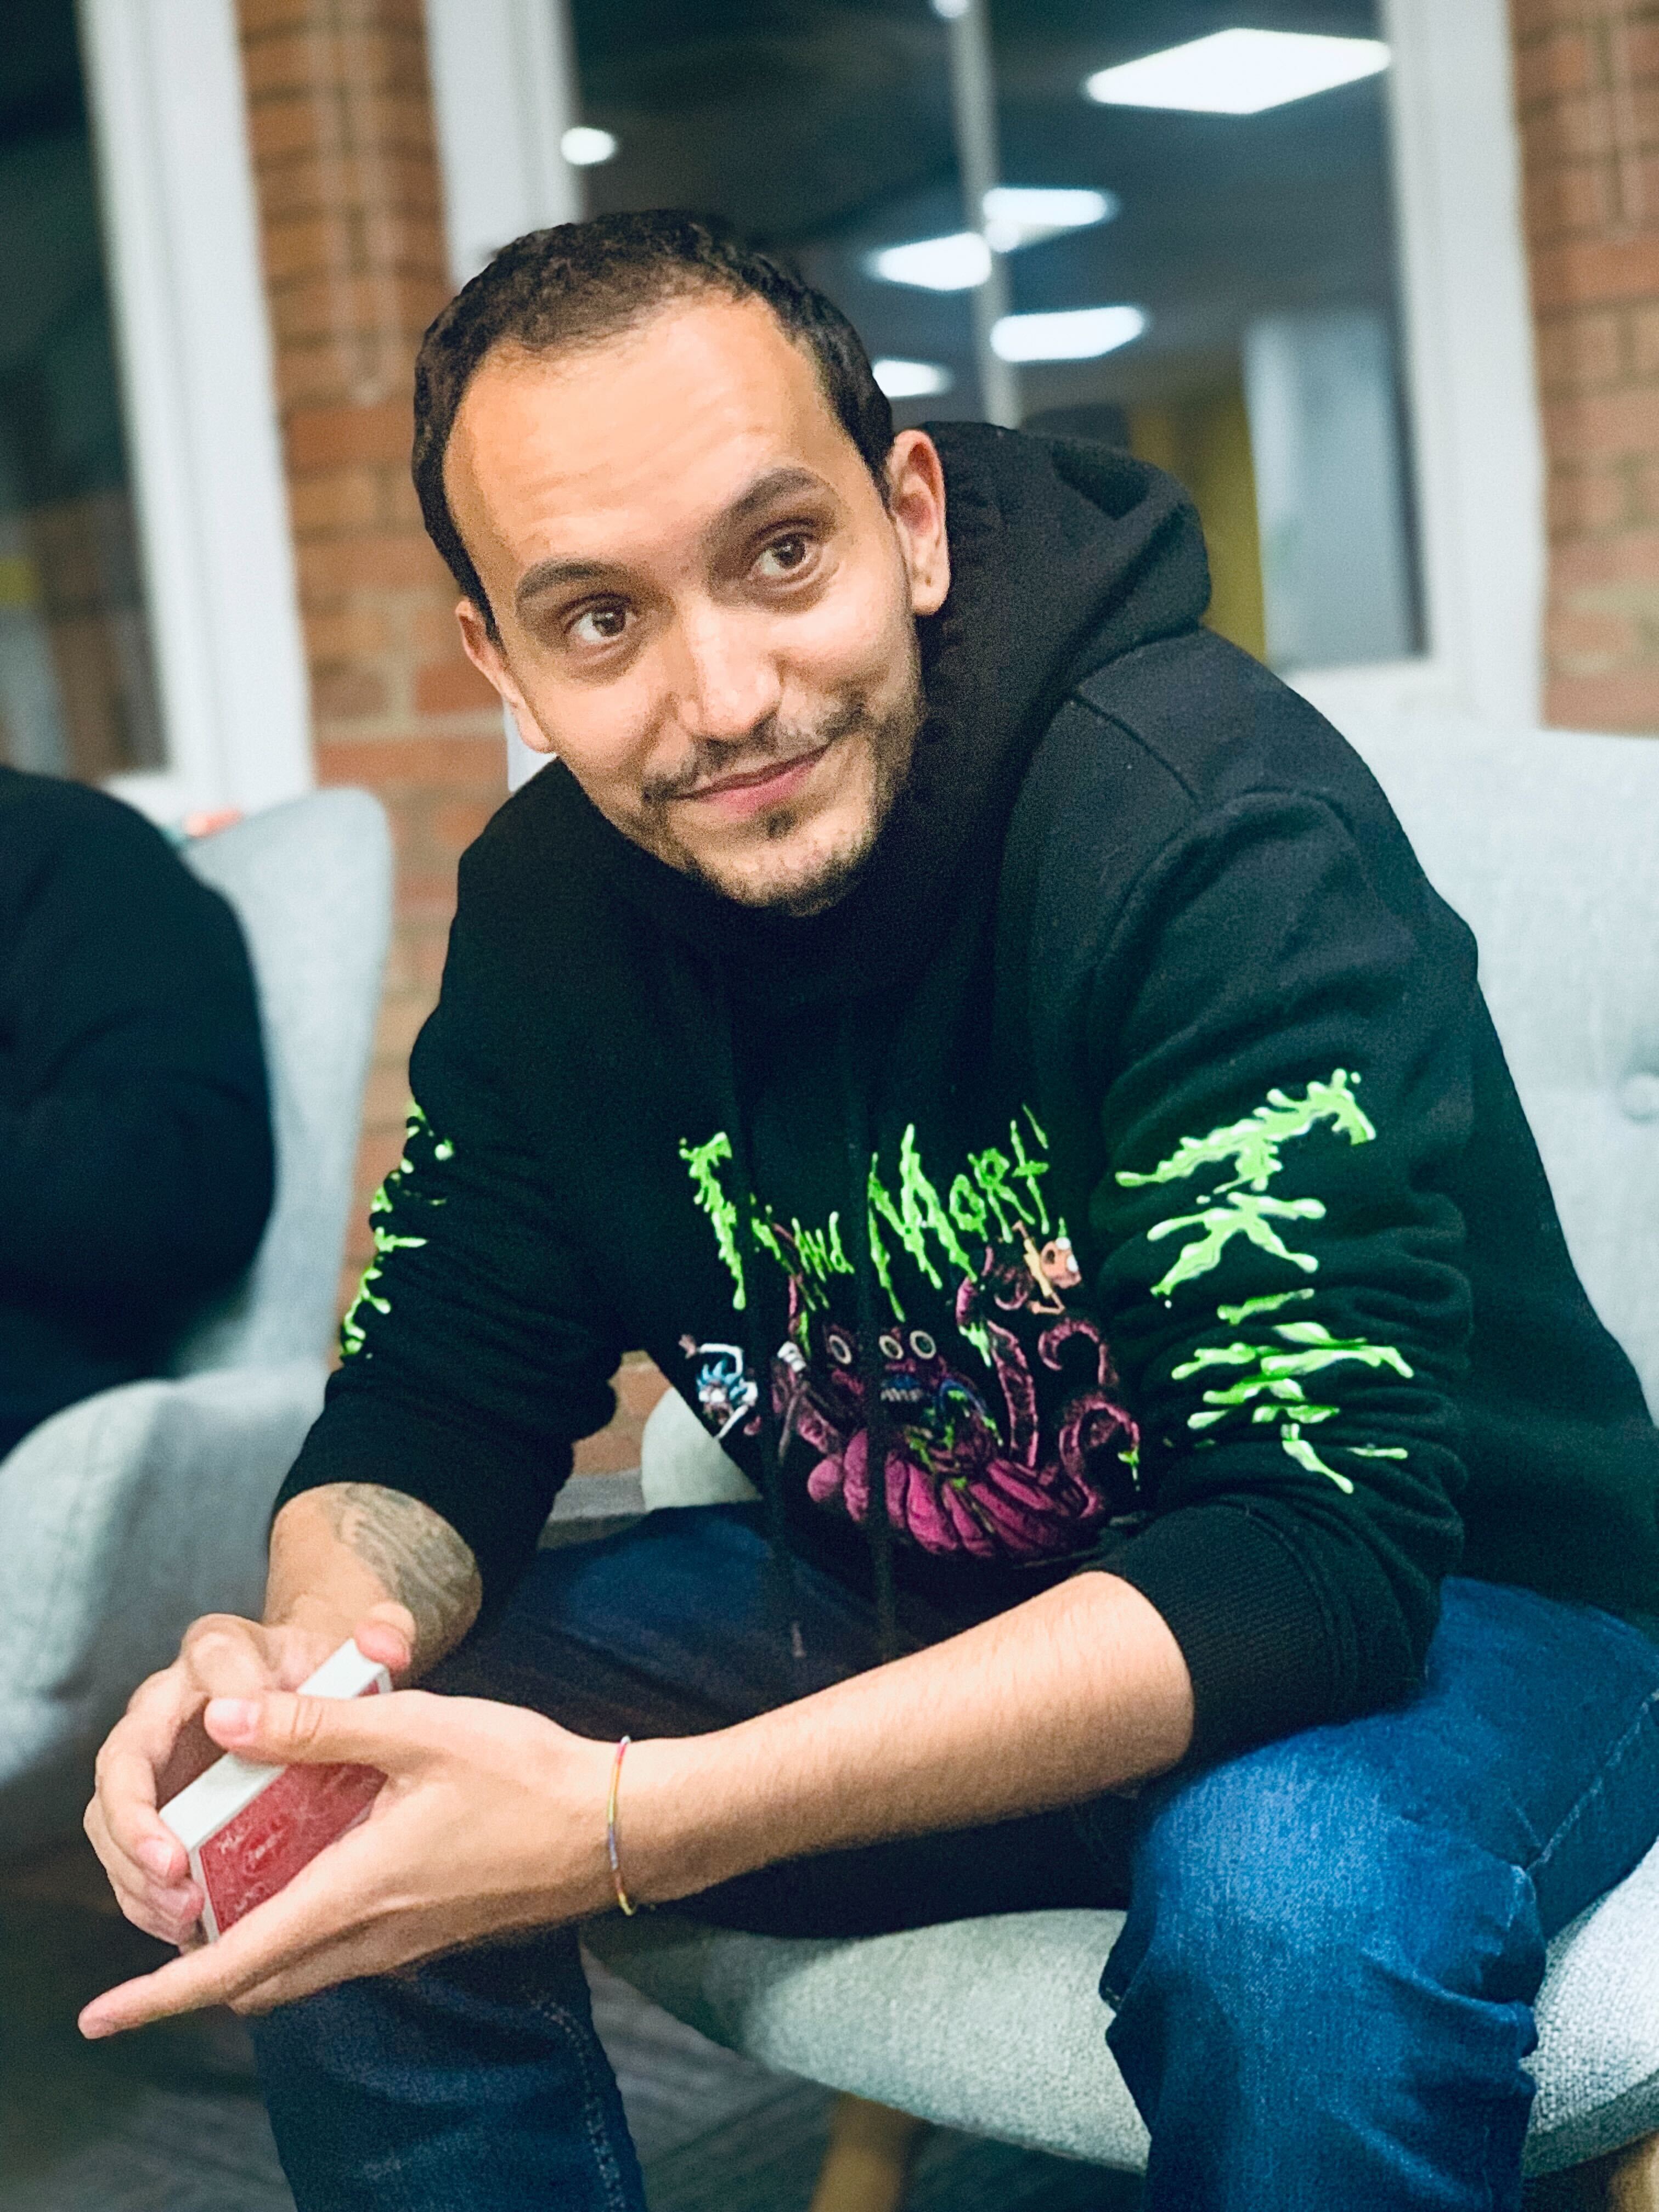 A photo of Daniel Andrade, a Recruitment Strategist for software engineering company Mindera, wearing a black hoodie and blue jeans while he holds a back of playing cards.